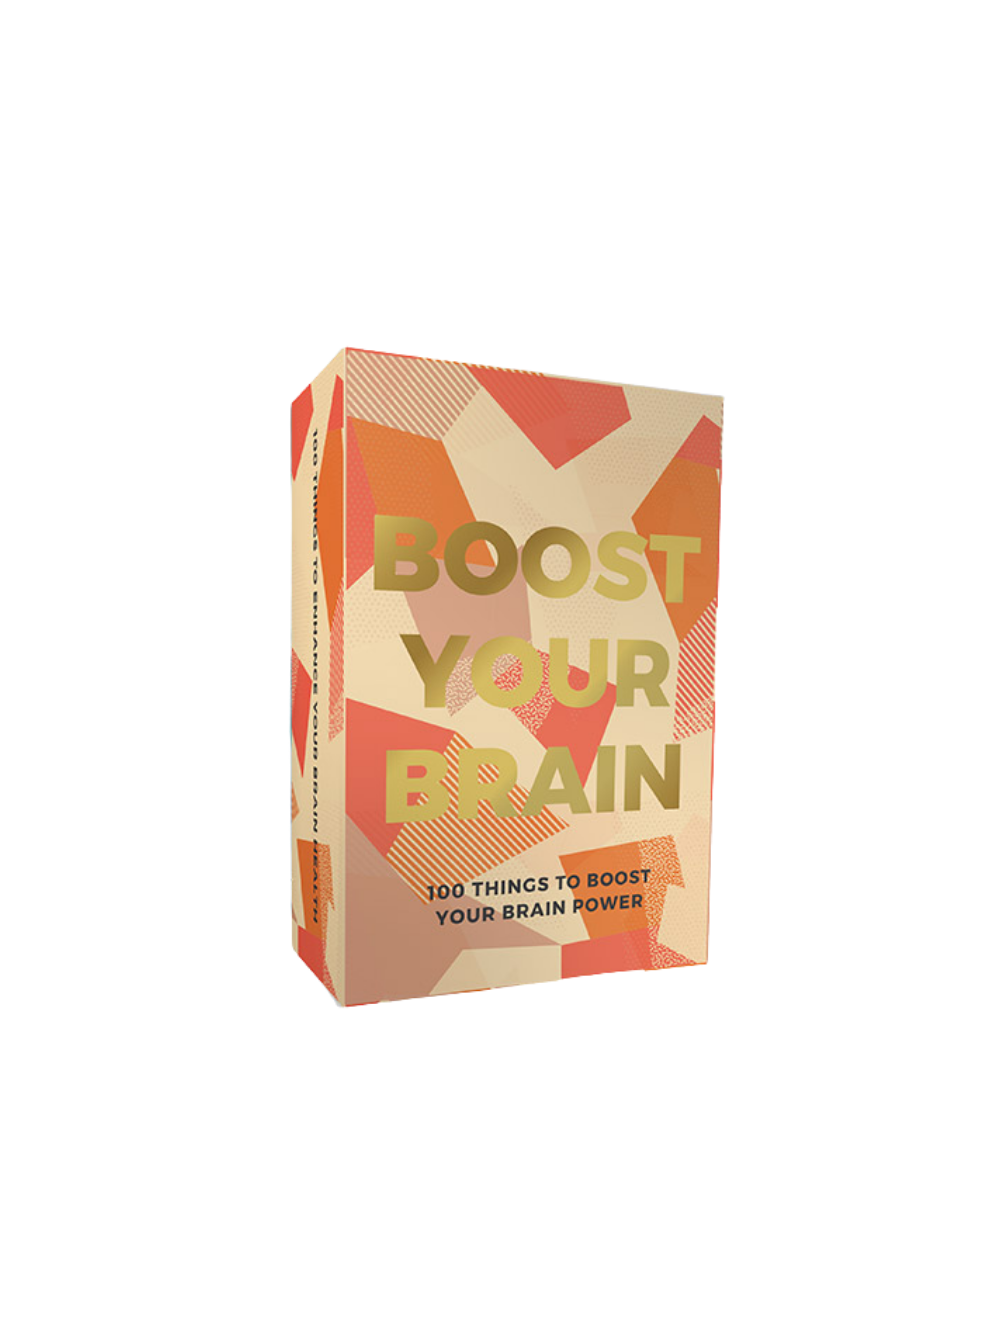 Fun daily challenges to boost your brain function. 100 cards per deck. 